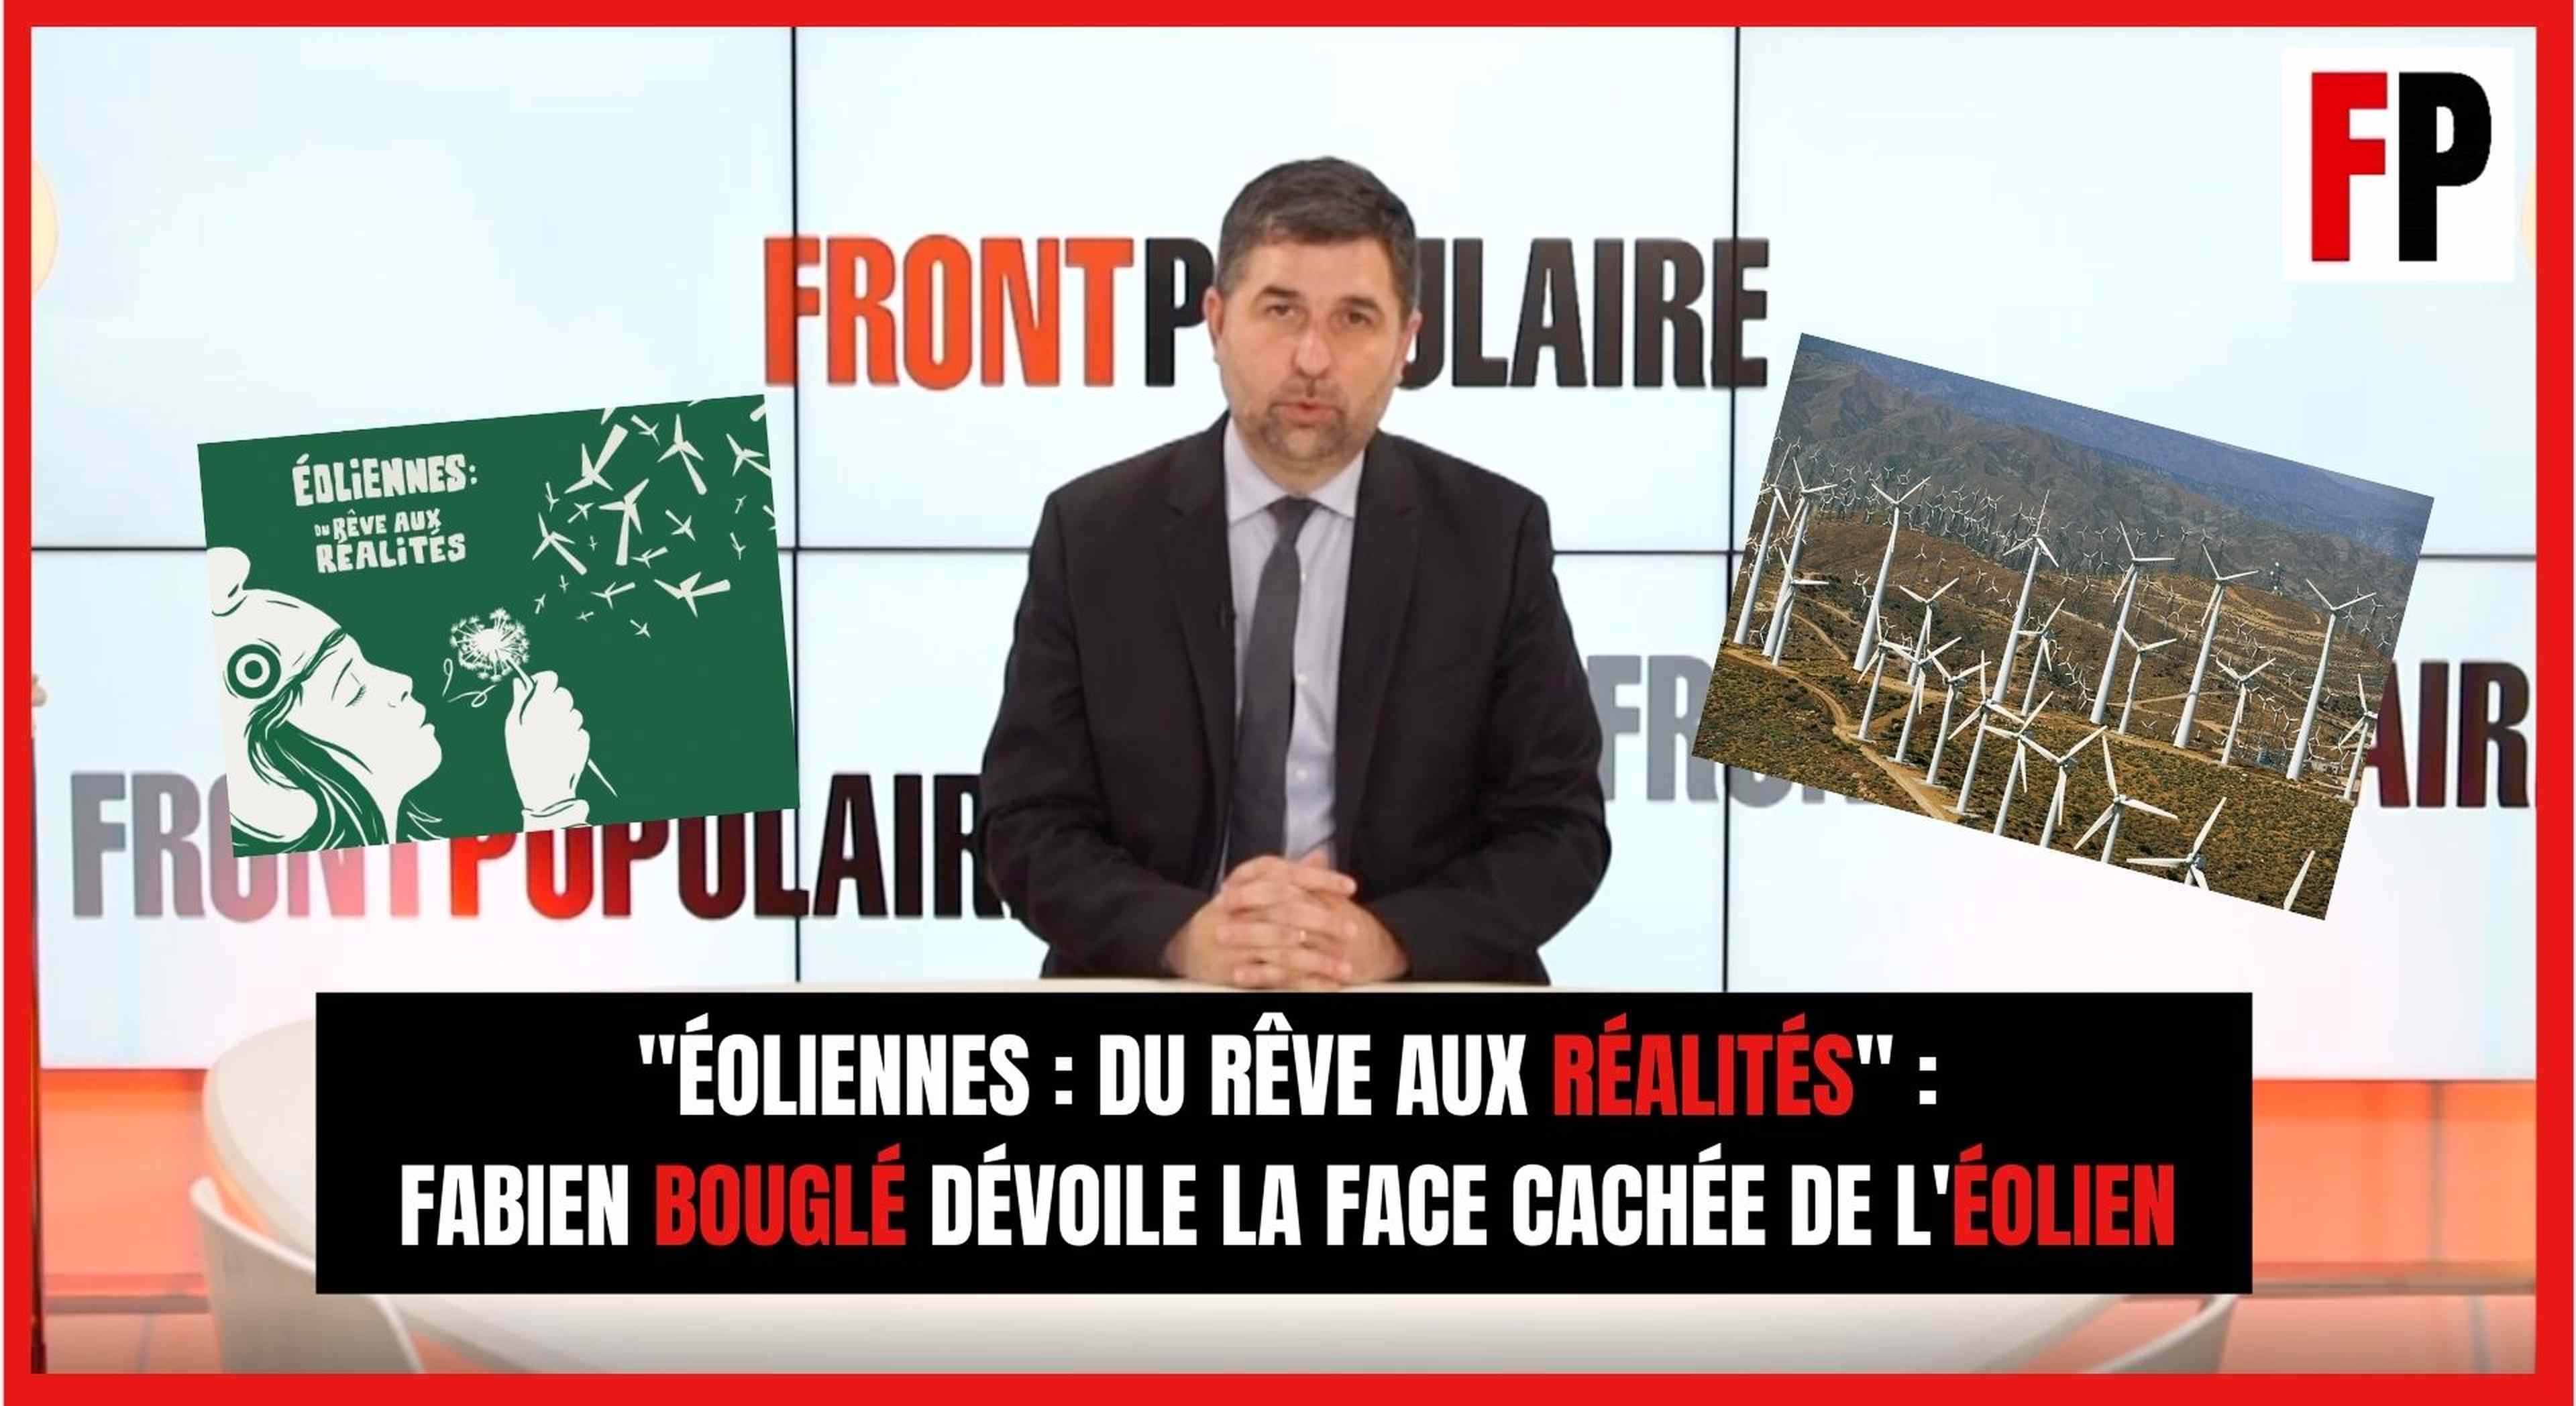 /2021/06/bougle-eoliennes-documentaire-front-populaire